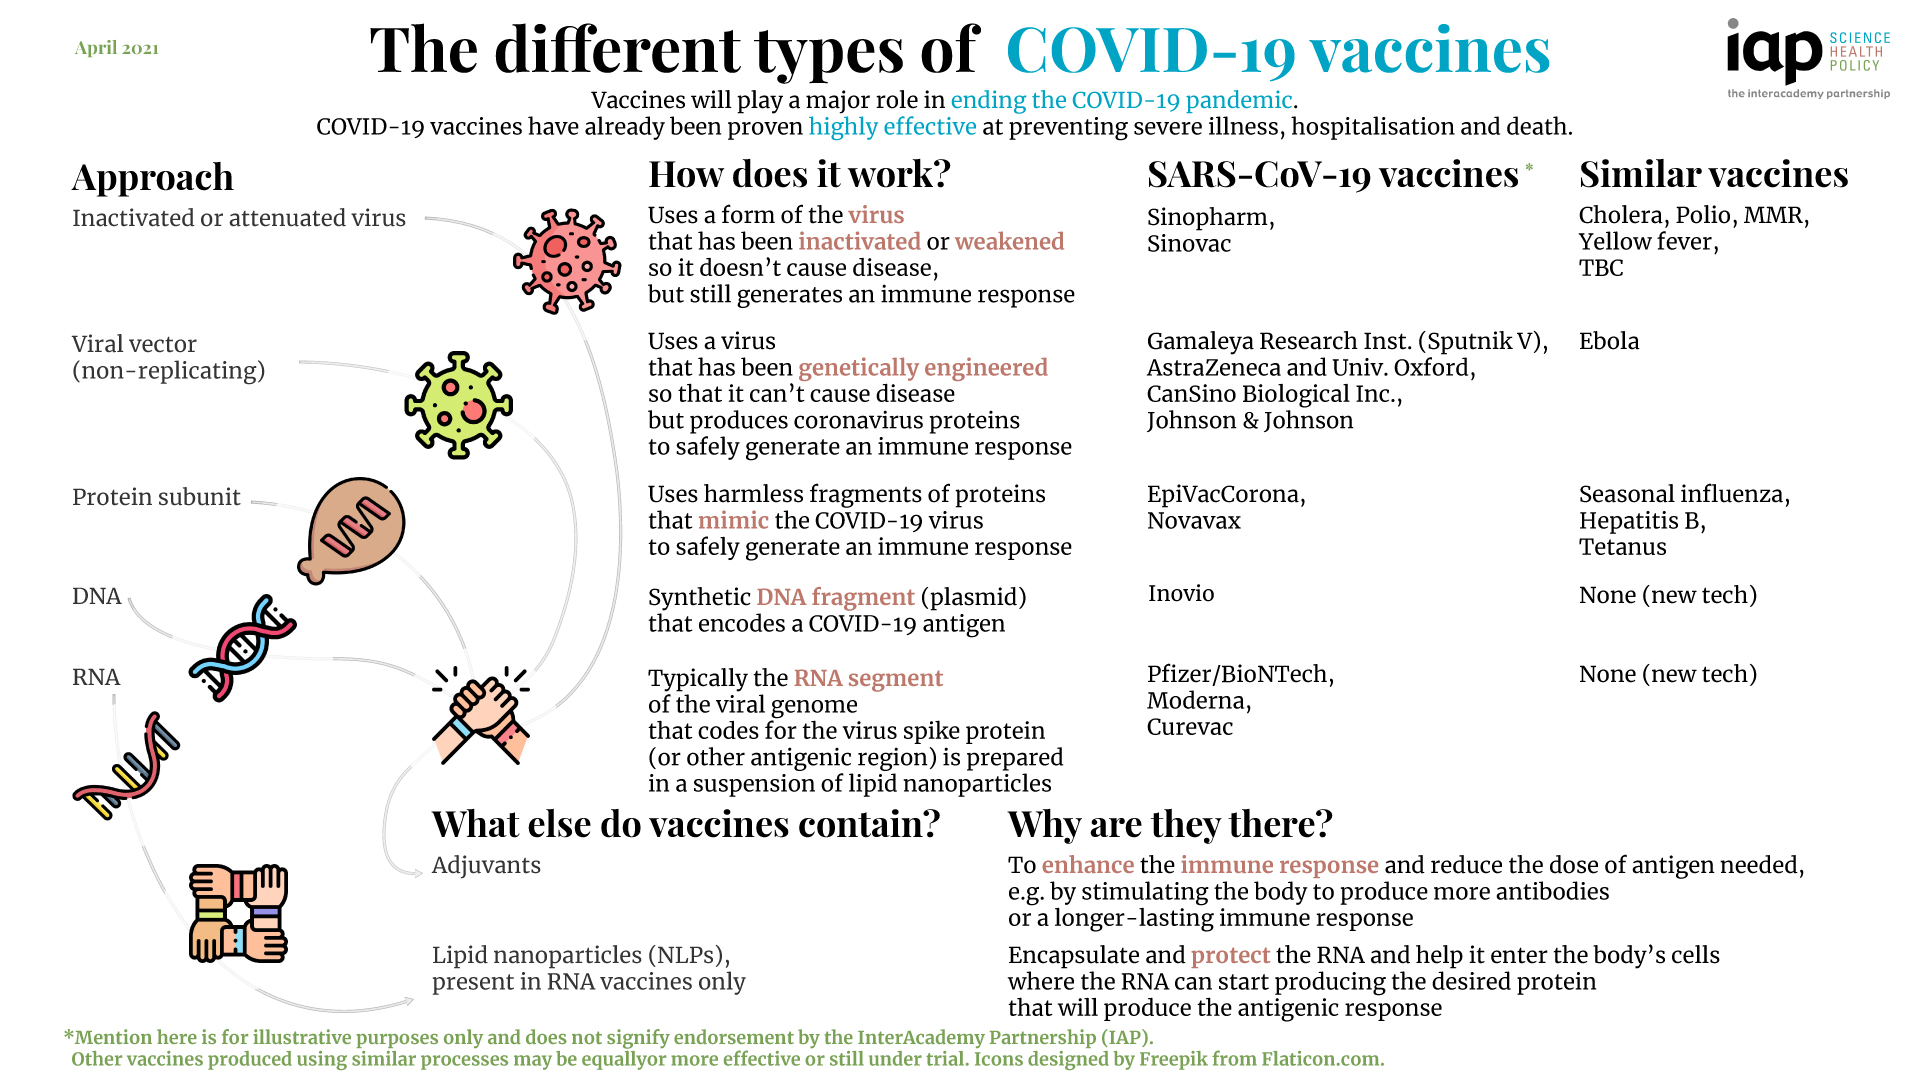 The different types of COVID-19 vaccines infographic